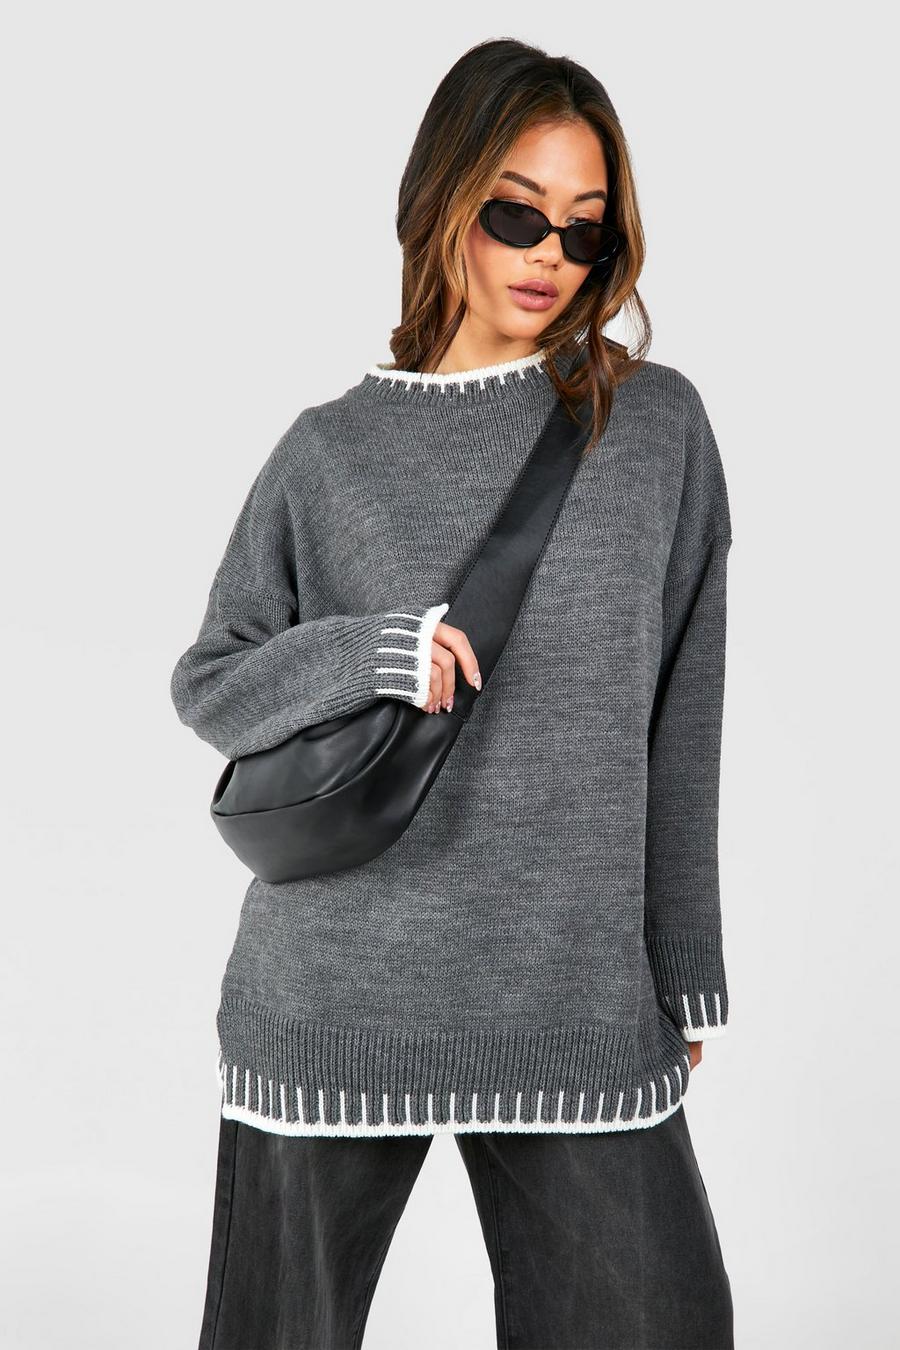 Charcoal Contrast Stitch Detail Sweater